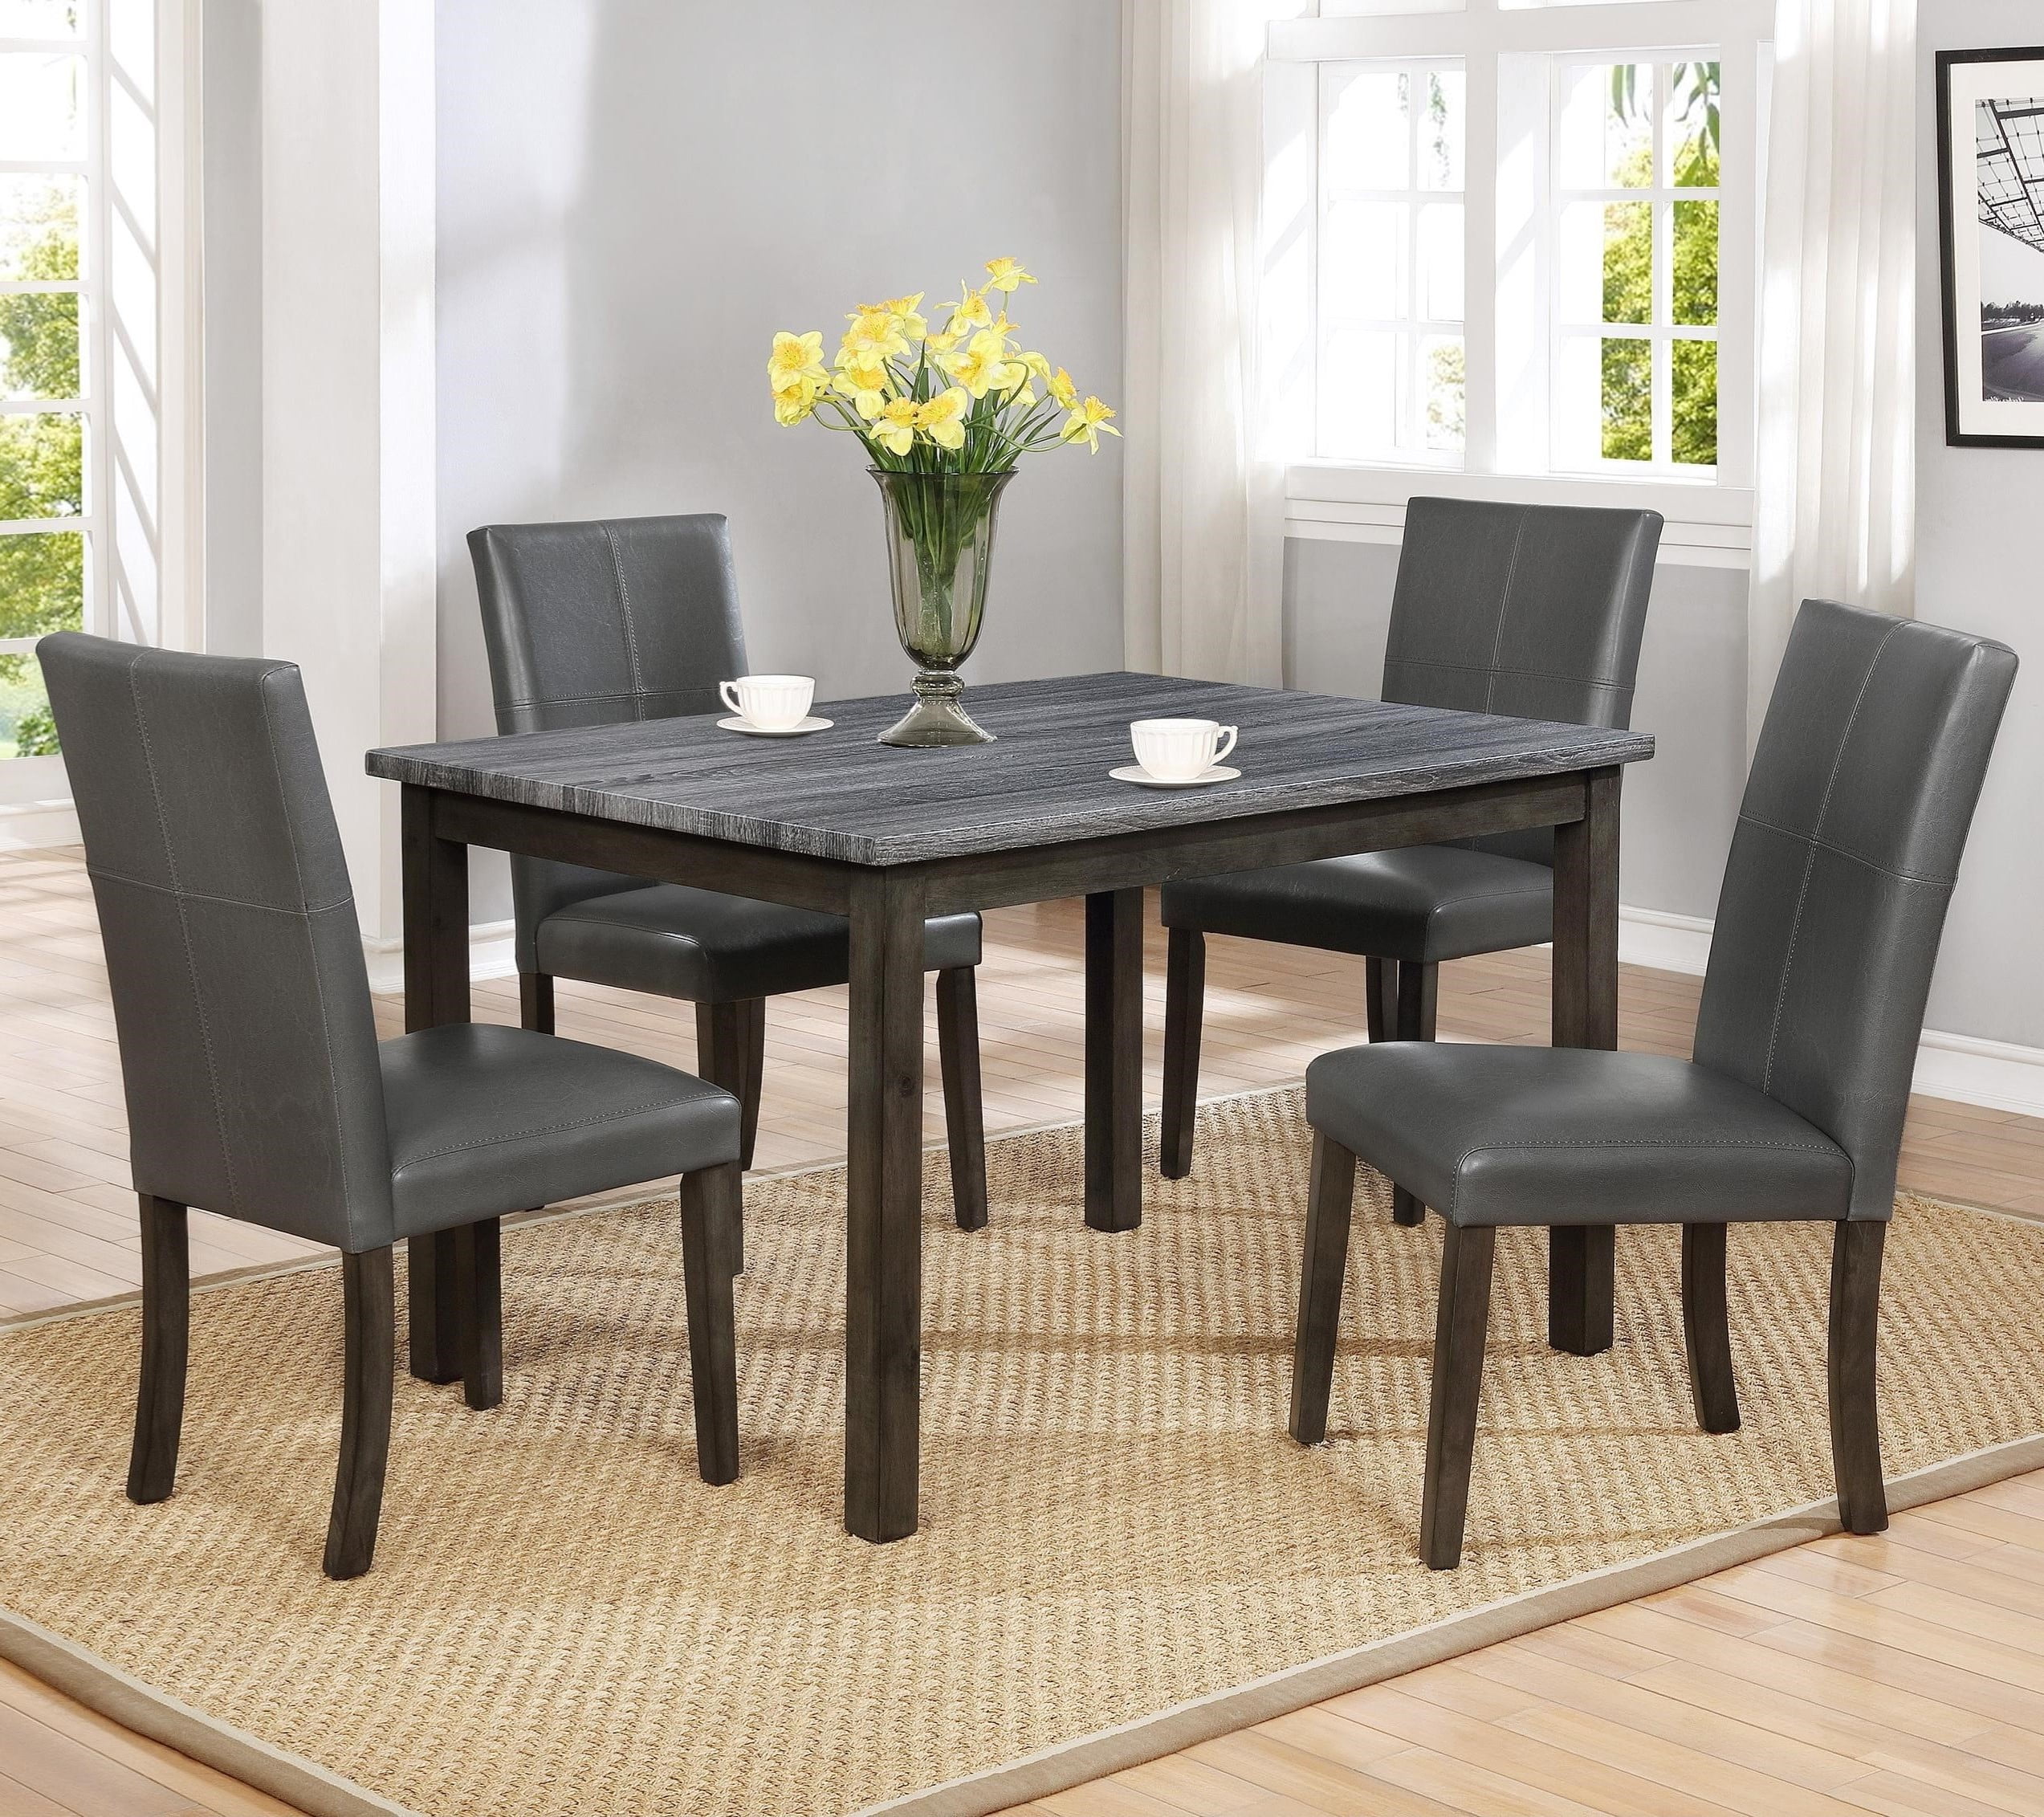 5pc Contemporary Style Dining Room Marble Top Set Table & Chairs ...